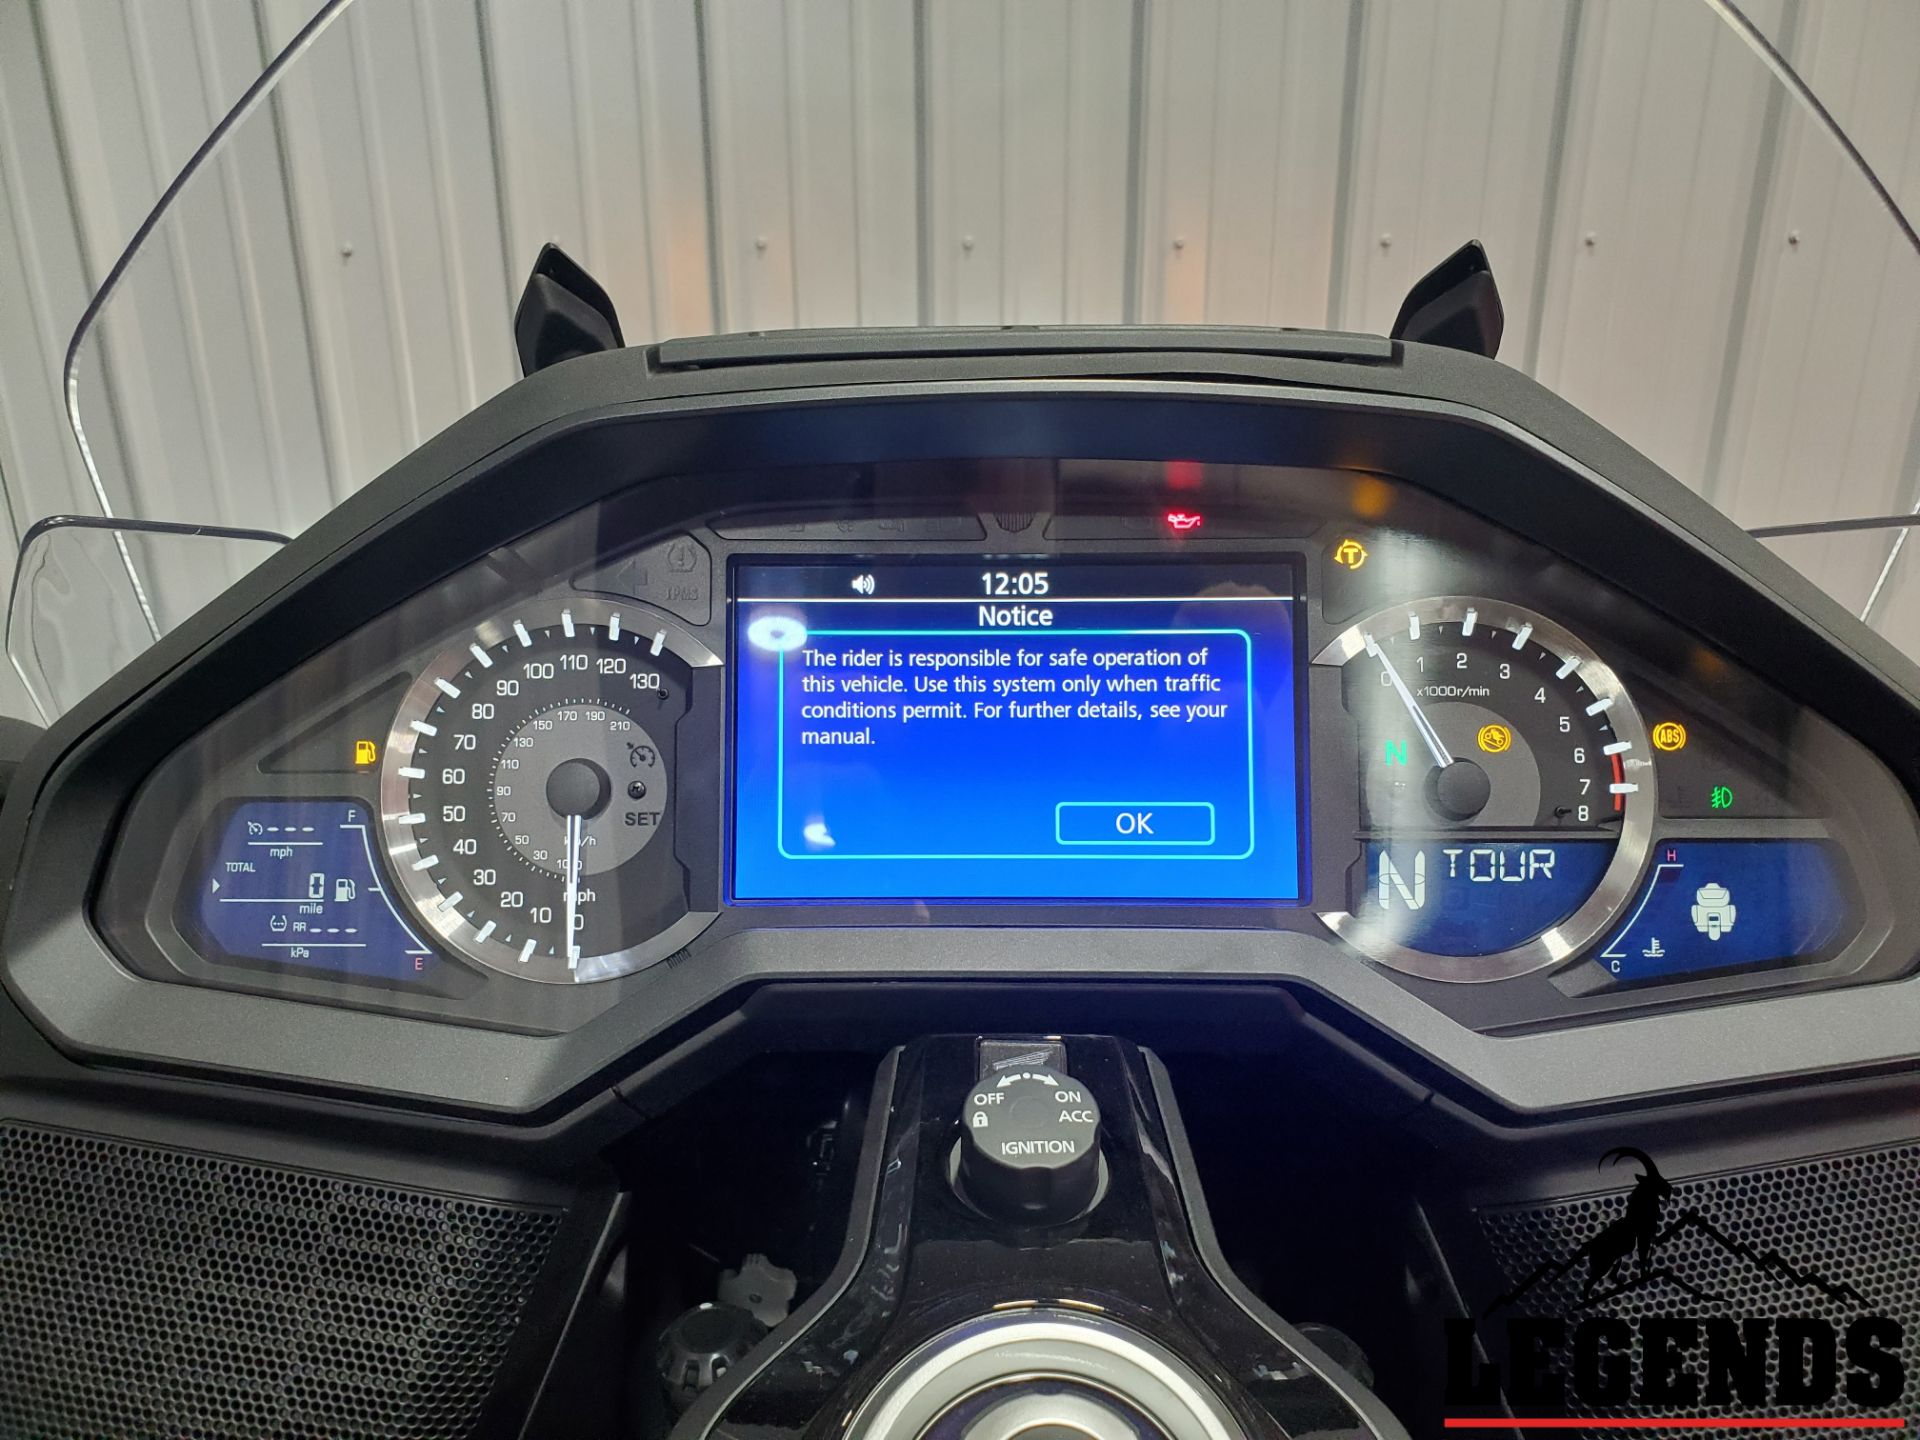 2023 Honda Gold Wing Automatic DCT in Brockway, Pennsylvania - Photo 12